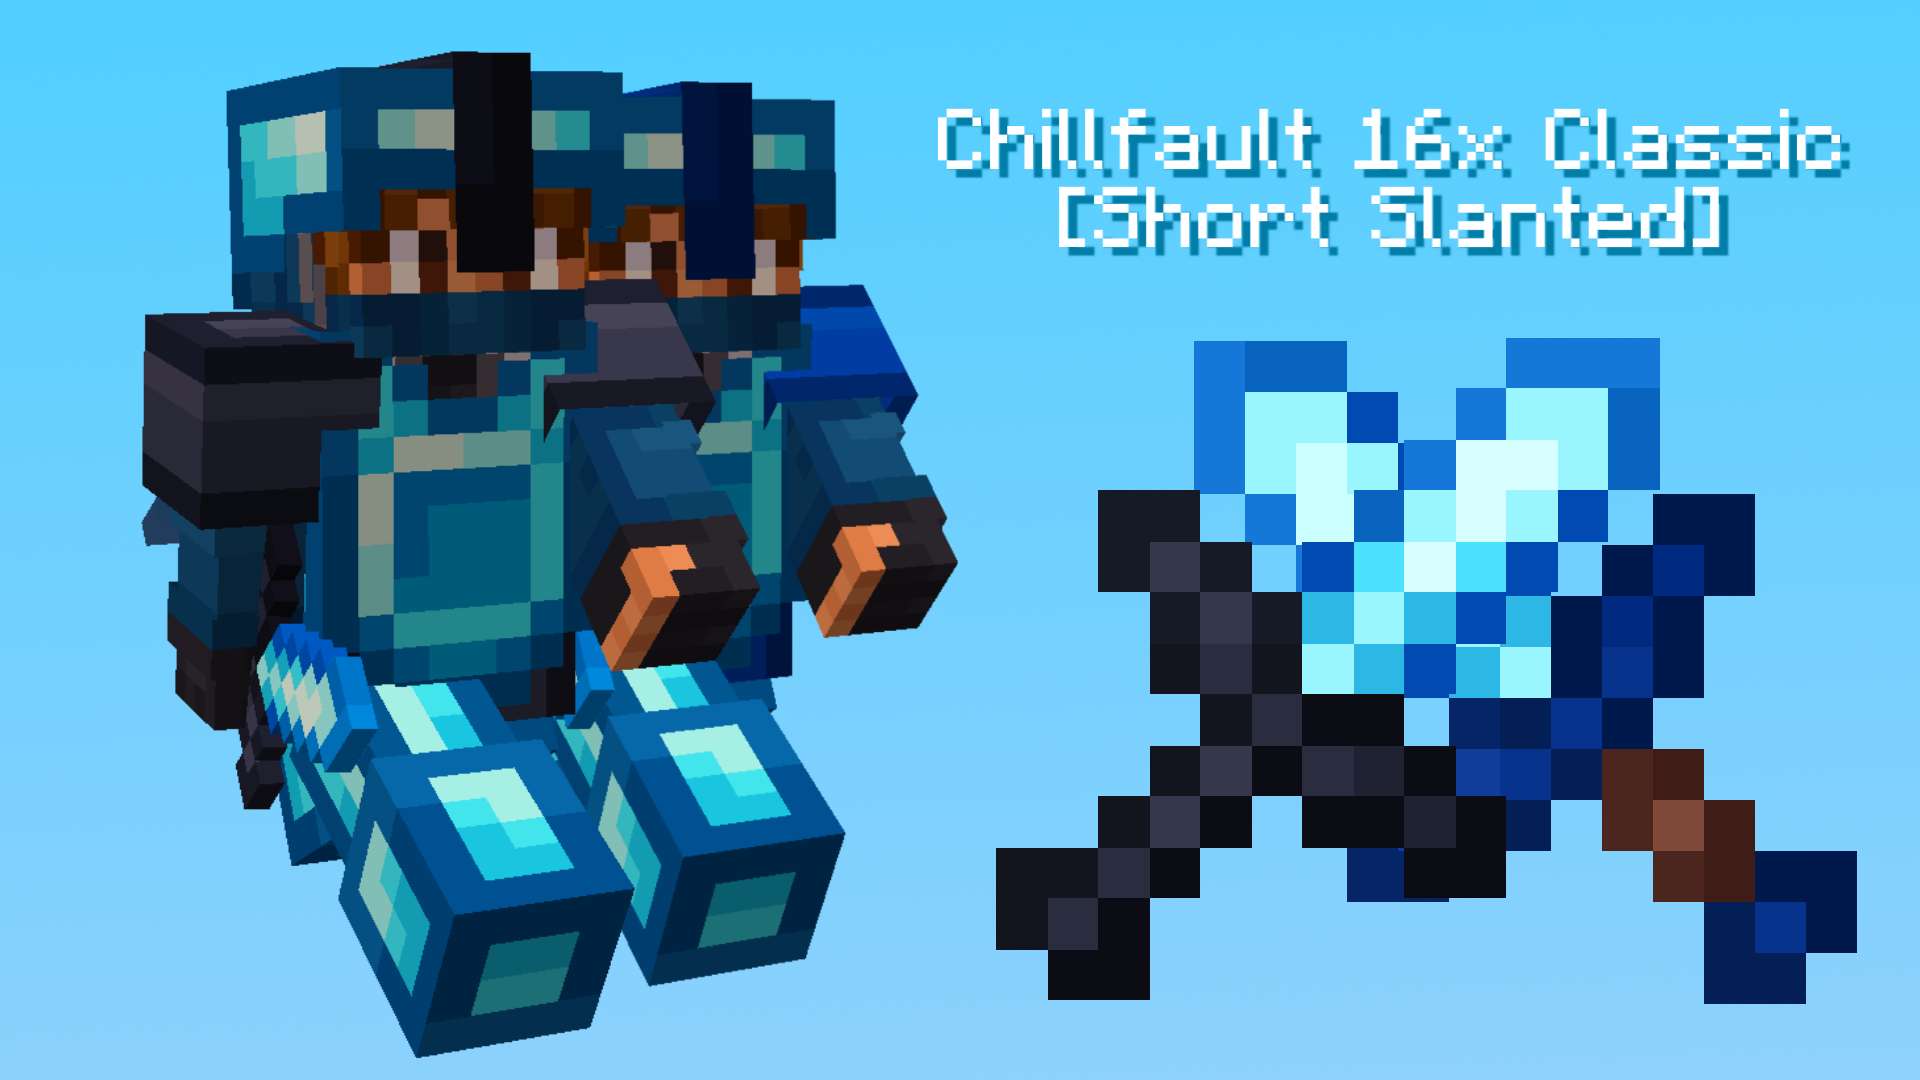 Chillfault  Classic [Short Slanted] 16x by Jes13 on PvPRP